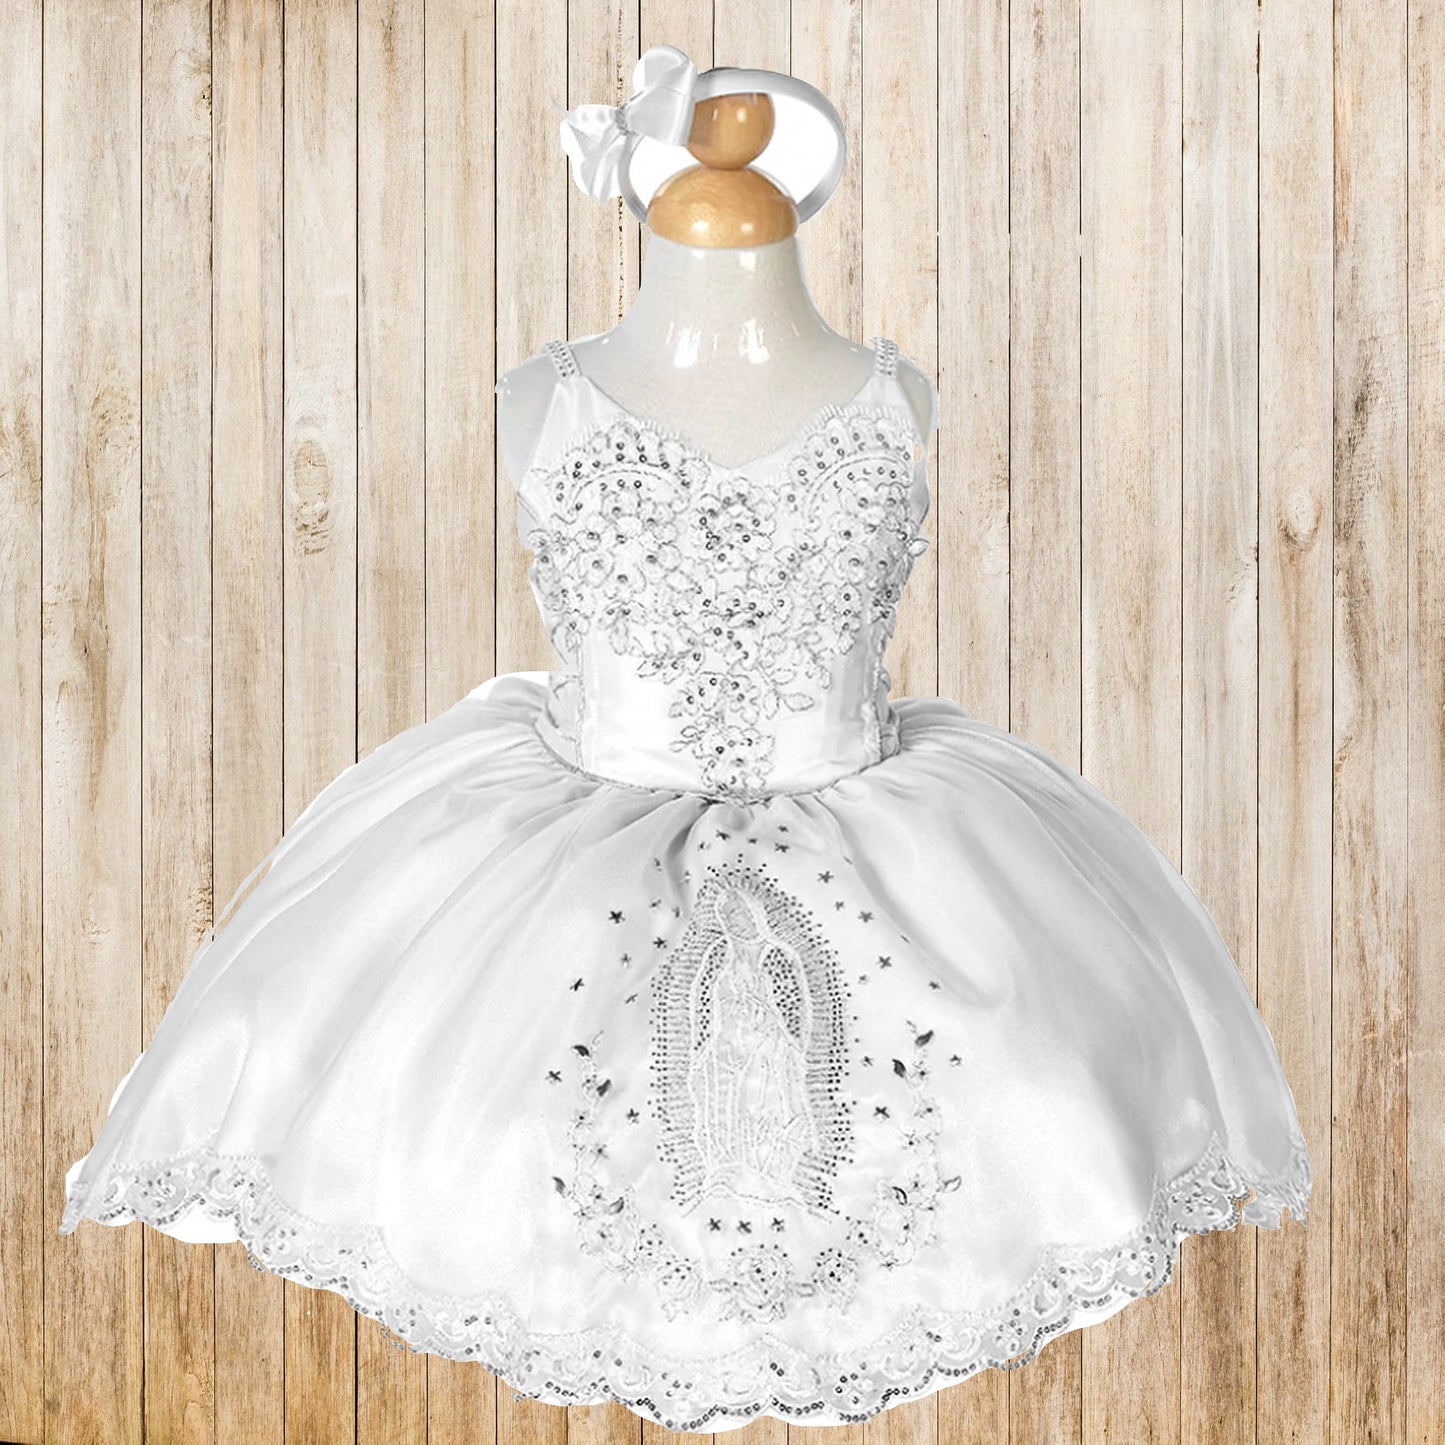 Baptism/Christening Gown AH114